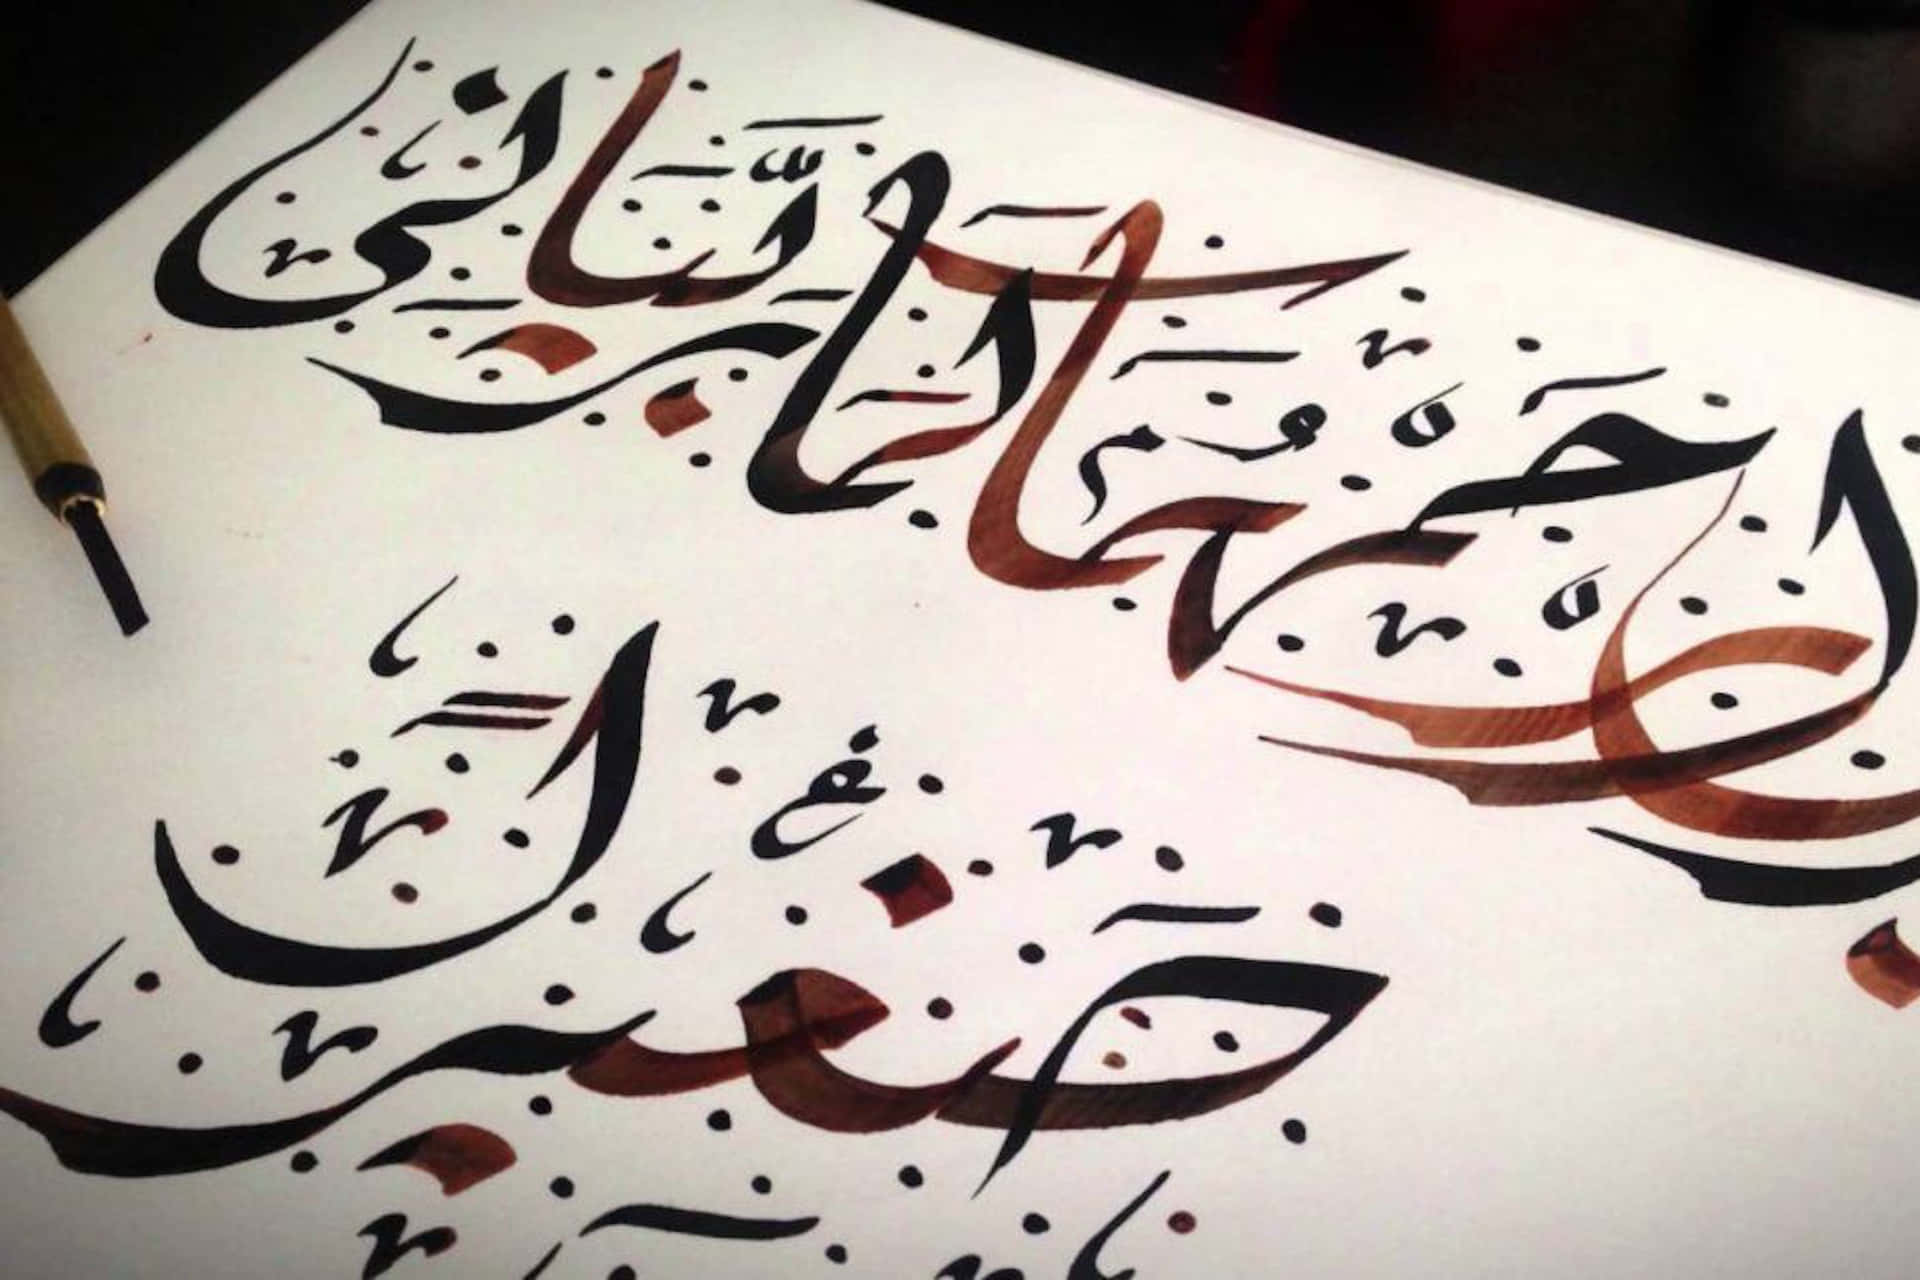 The Calligraphy of an Arabic Script